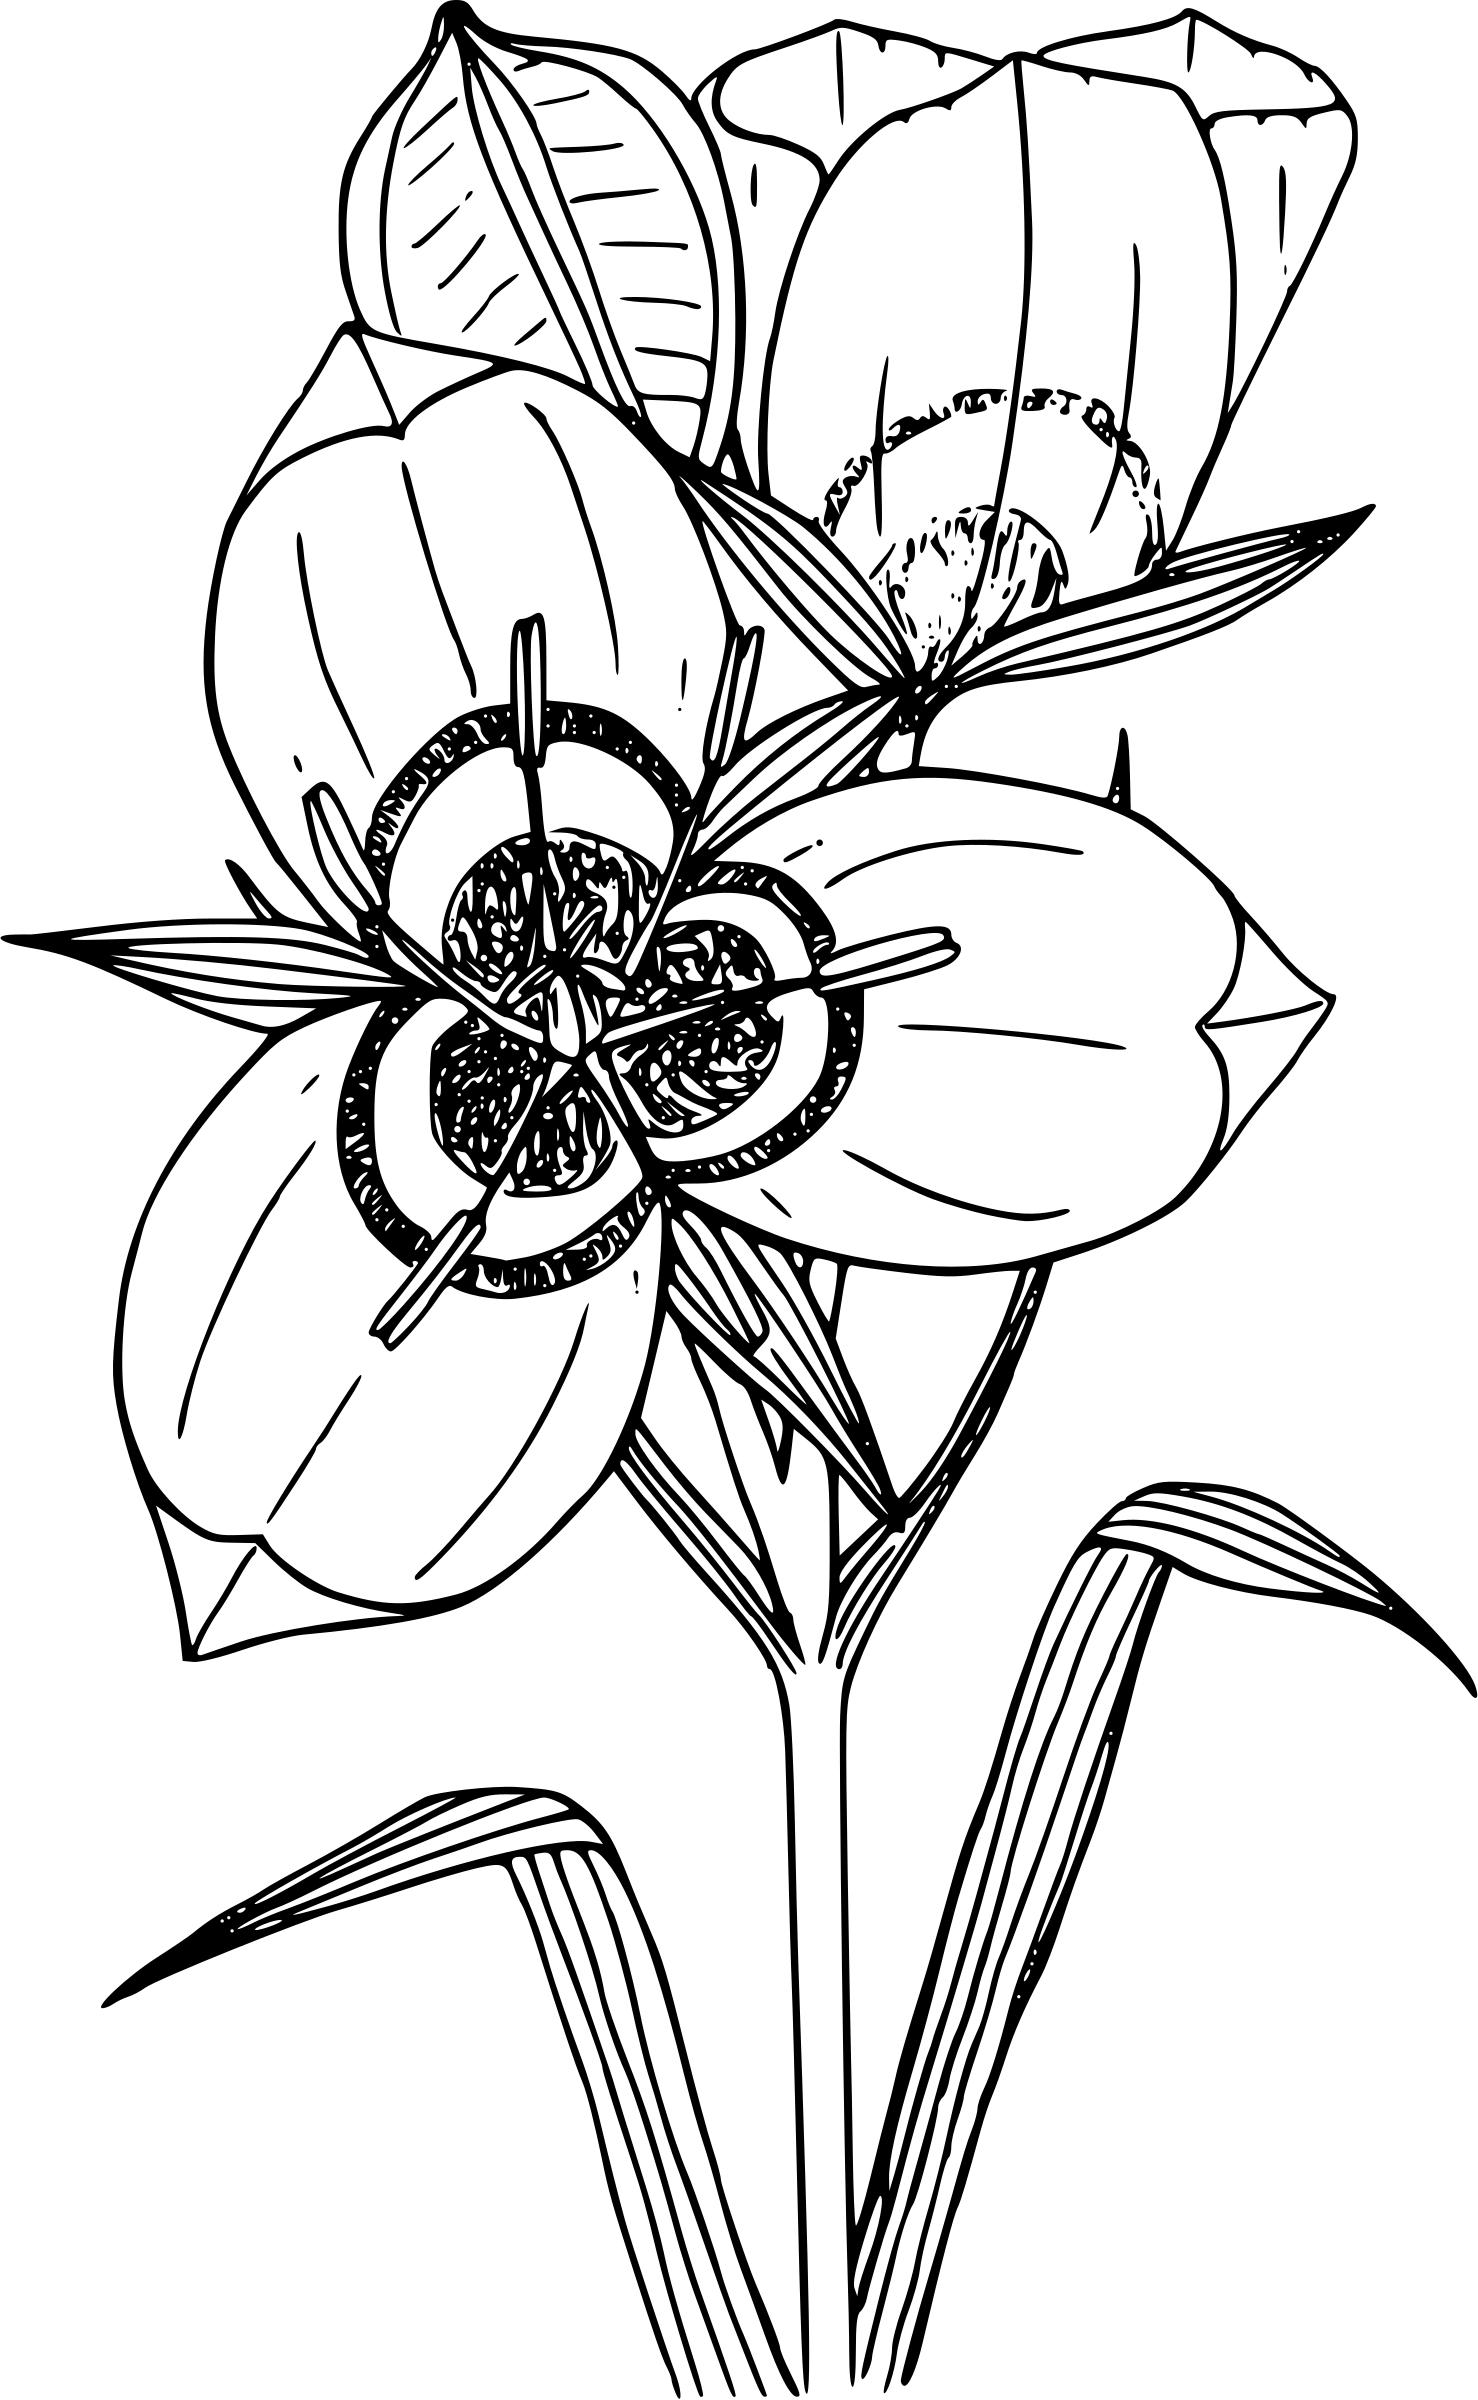 Big-podded mariposa lily png